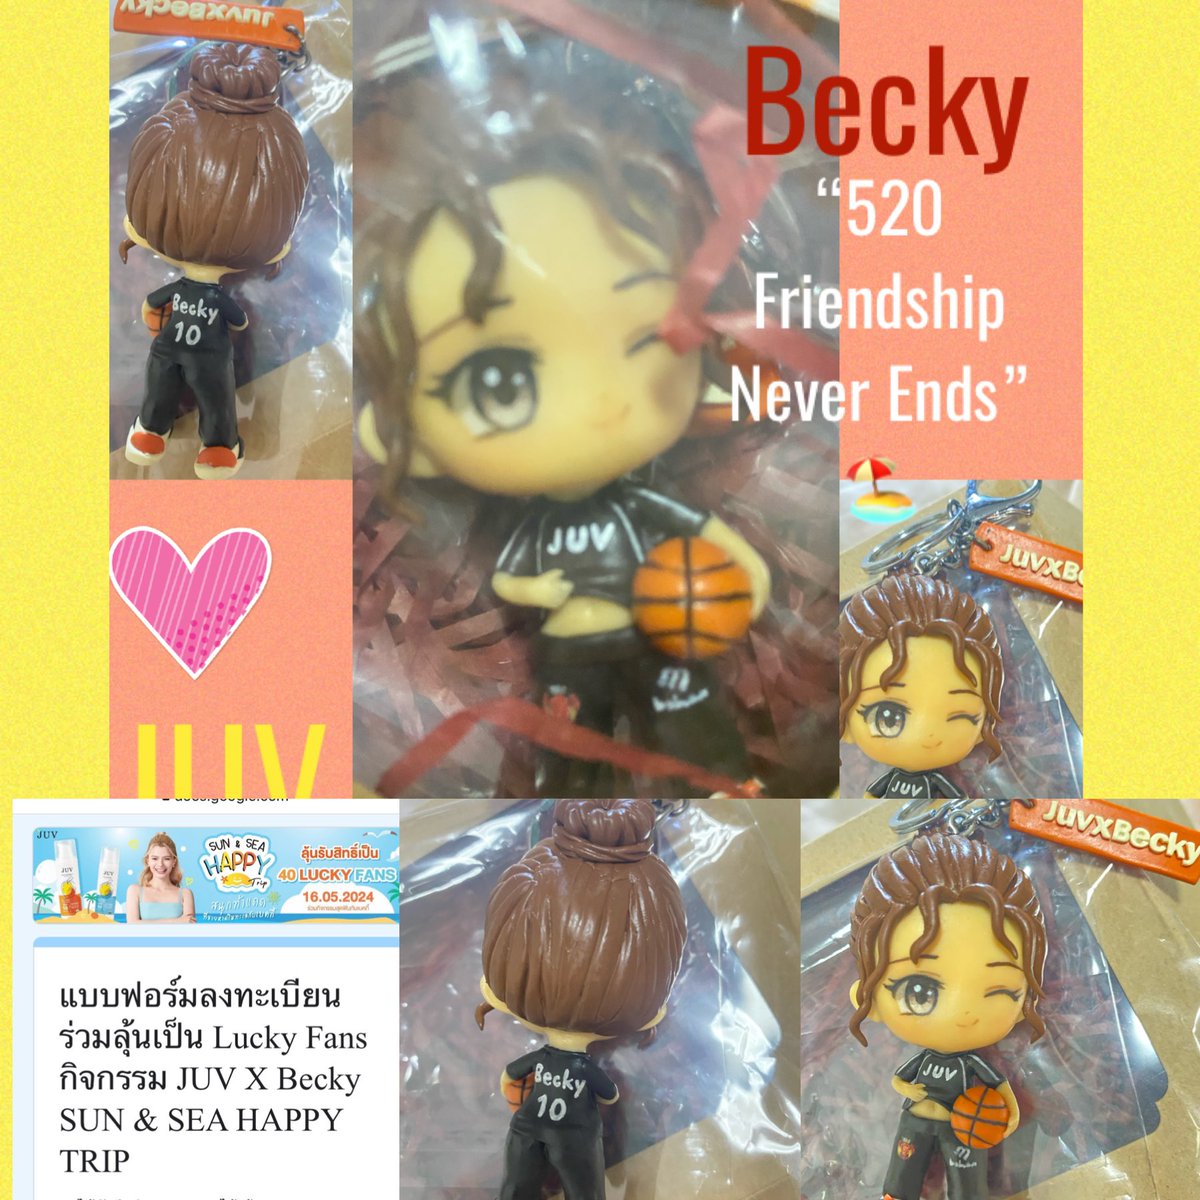 I'd like Mamee to go to the beach with Beck too.🥹🥹🥹🙆‍♀️🙆‍♀️🙆‍♀️
Aloha! Welcome fans to the campaign. JUV X Becky SUN & SEA HAPPY TRIP  comes with the concept “520 Friendship Never Ends” 🏖️
Invite everyone to have fun in the sun by the sea with Becky. Continuing the good friendship…